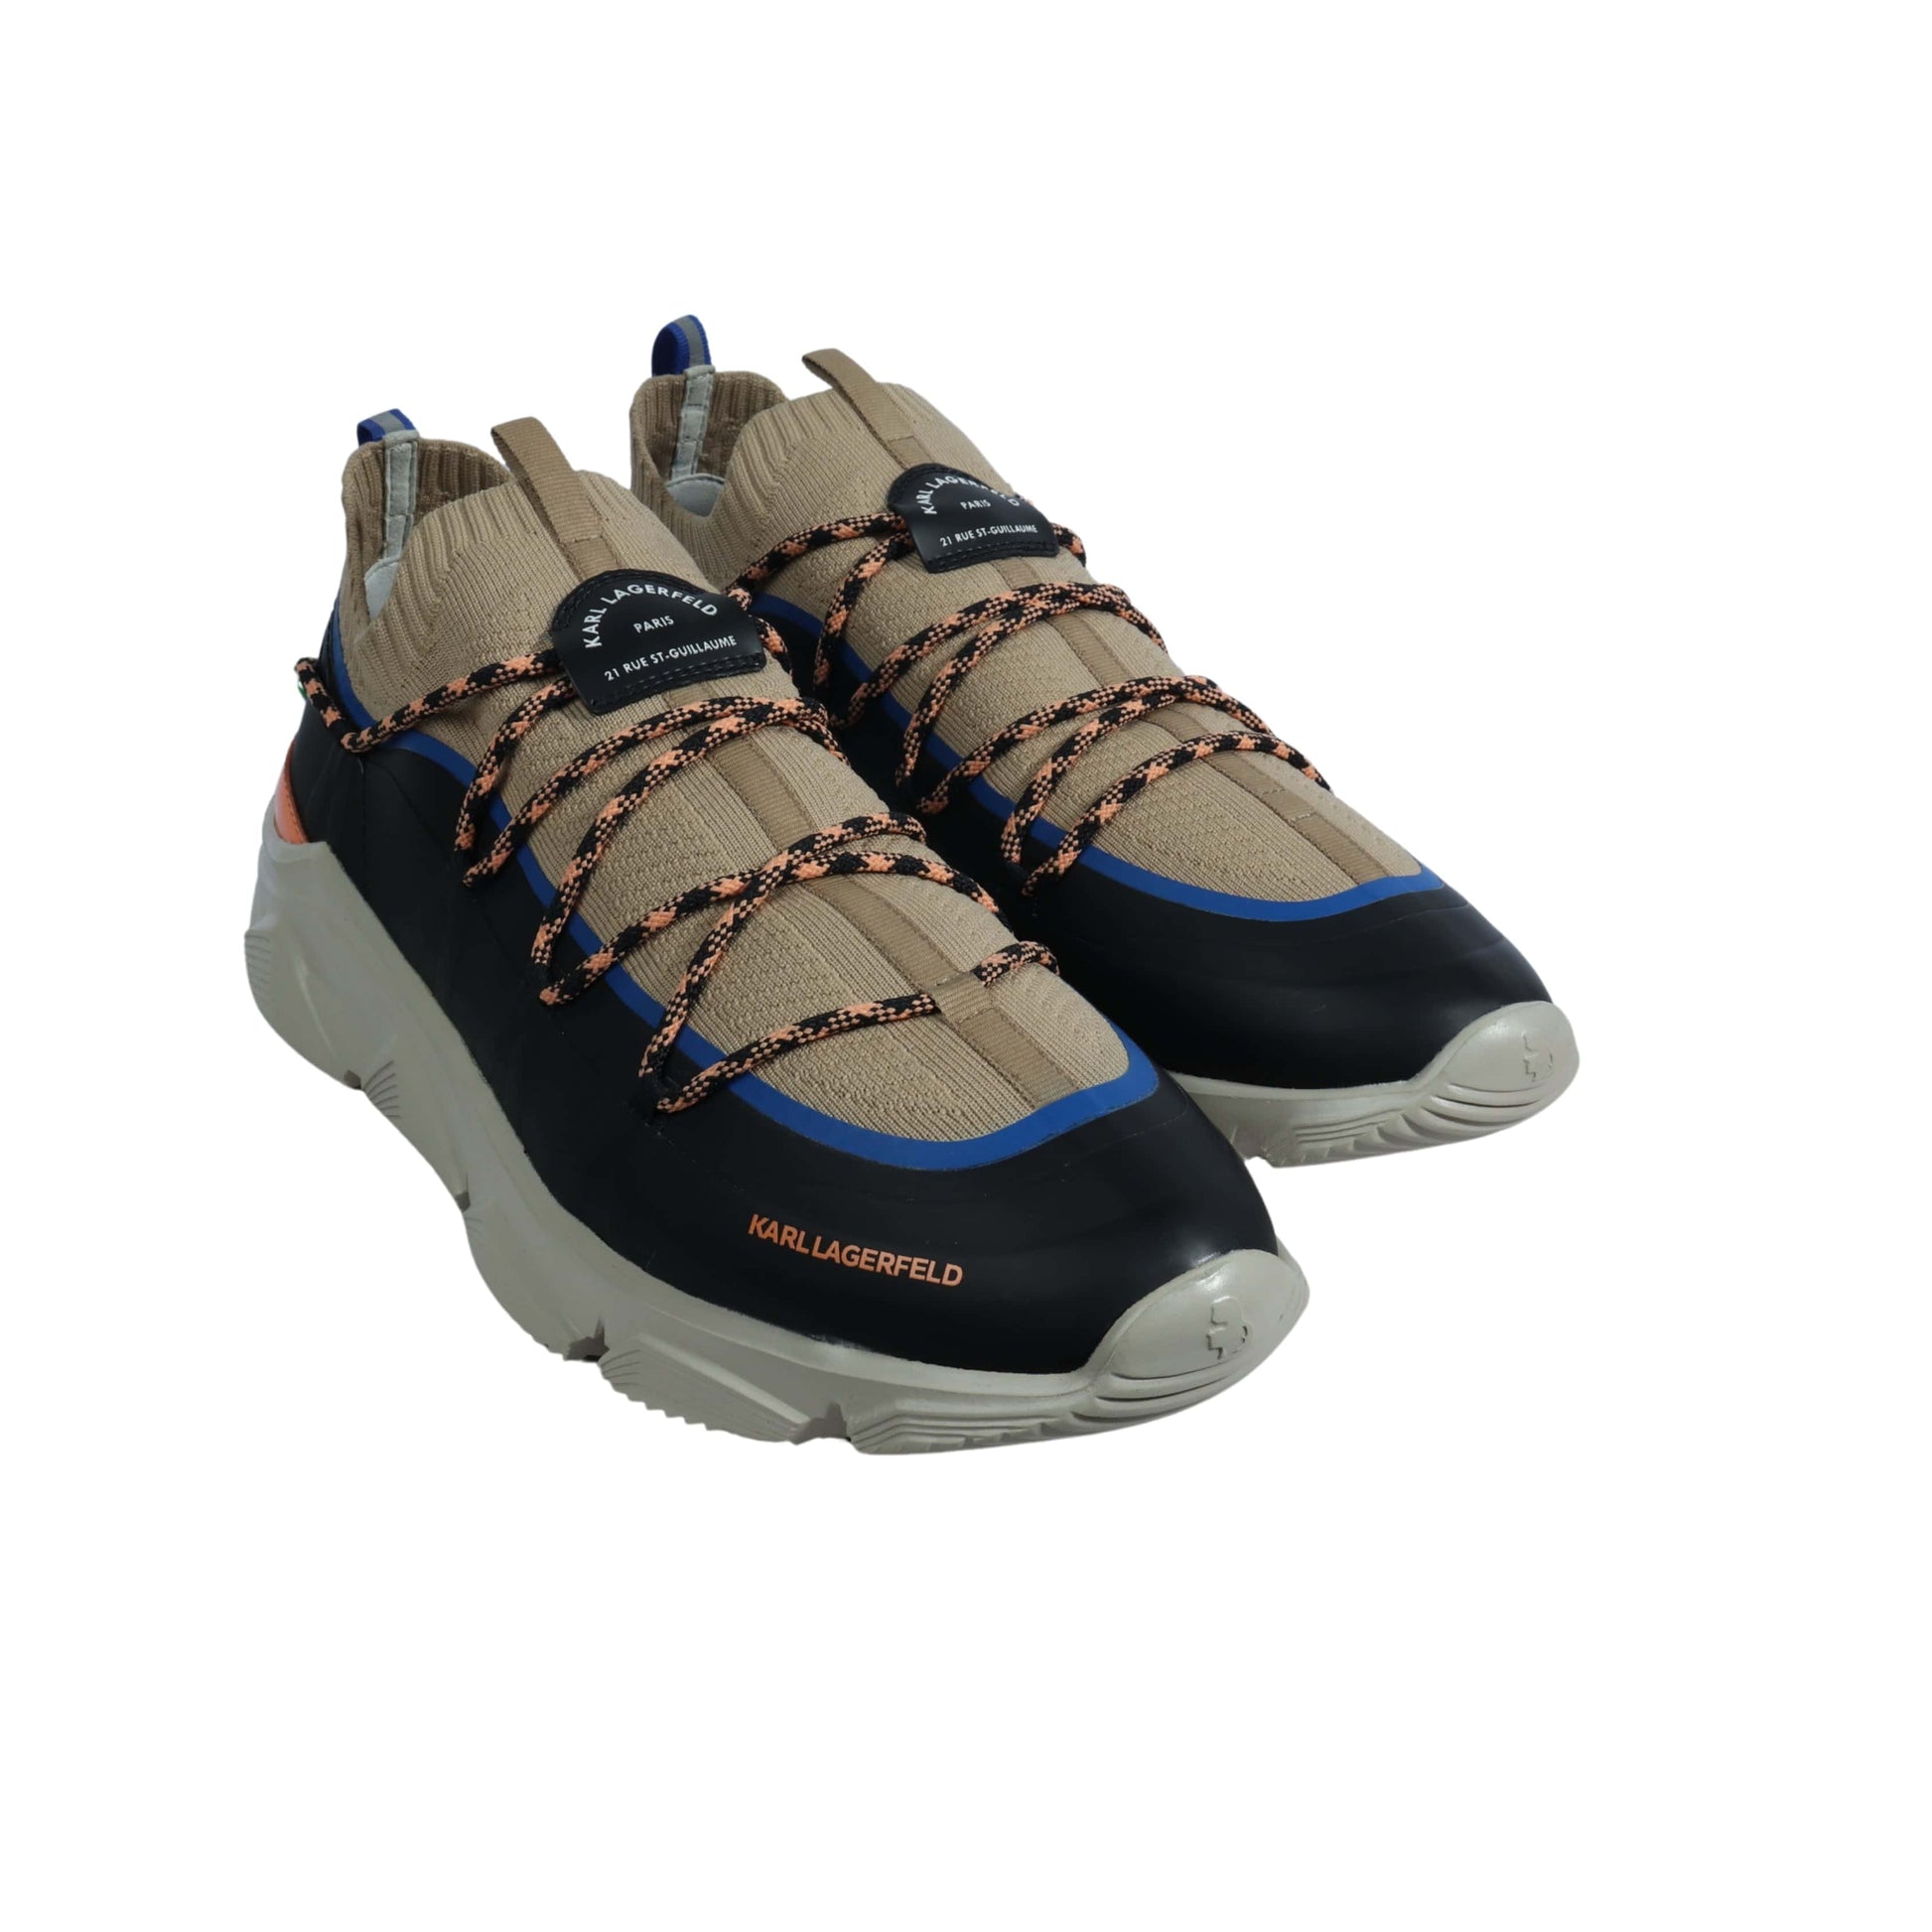 KARL LAGERFELD Mens Shoes 43 / Multi-Color KARL LAGERFELD - Designed Lace-Up Sneakers